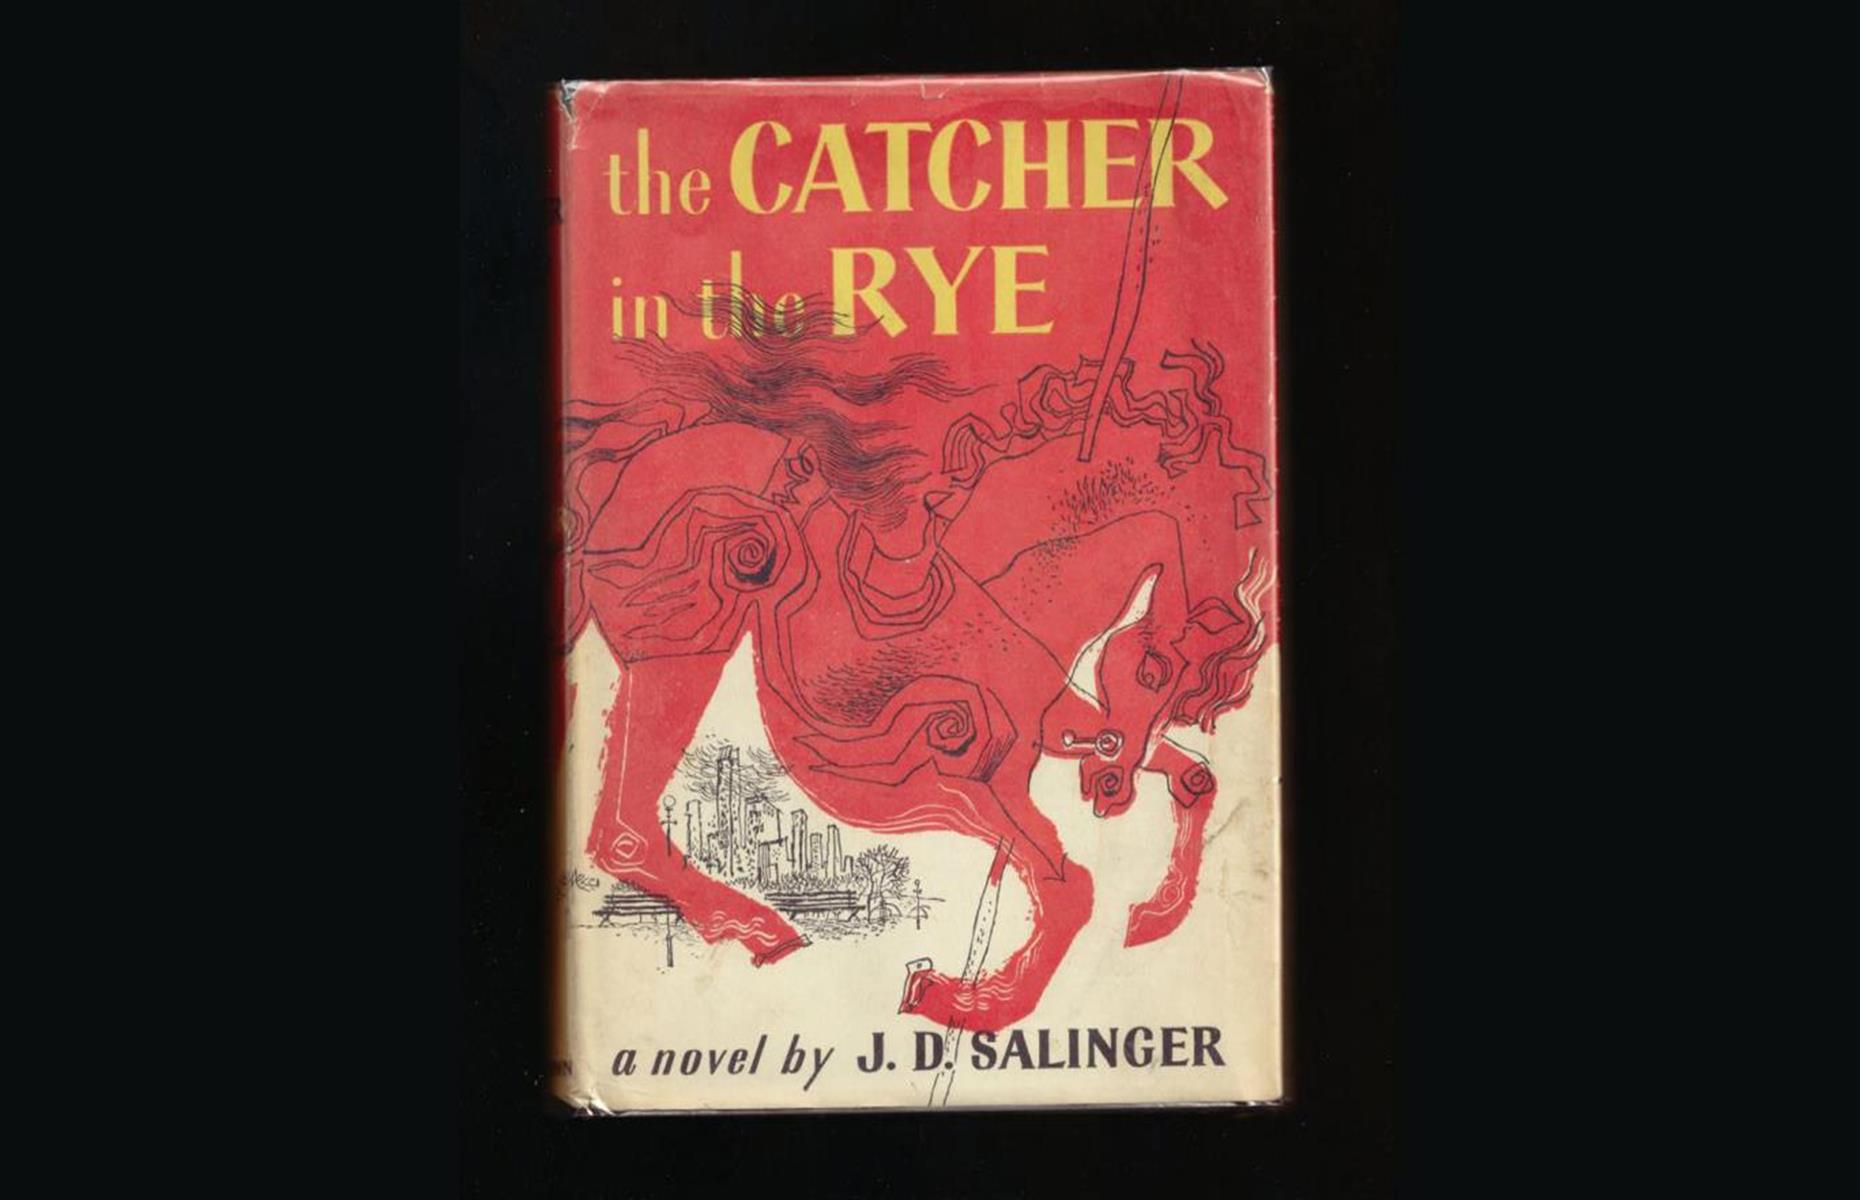 The Catcher in the Rye: up to $60,000 (£48,420)